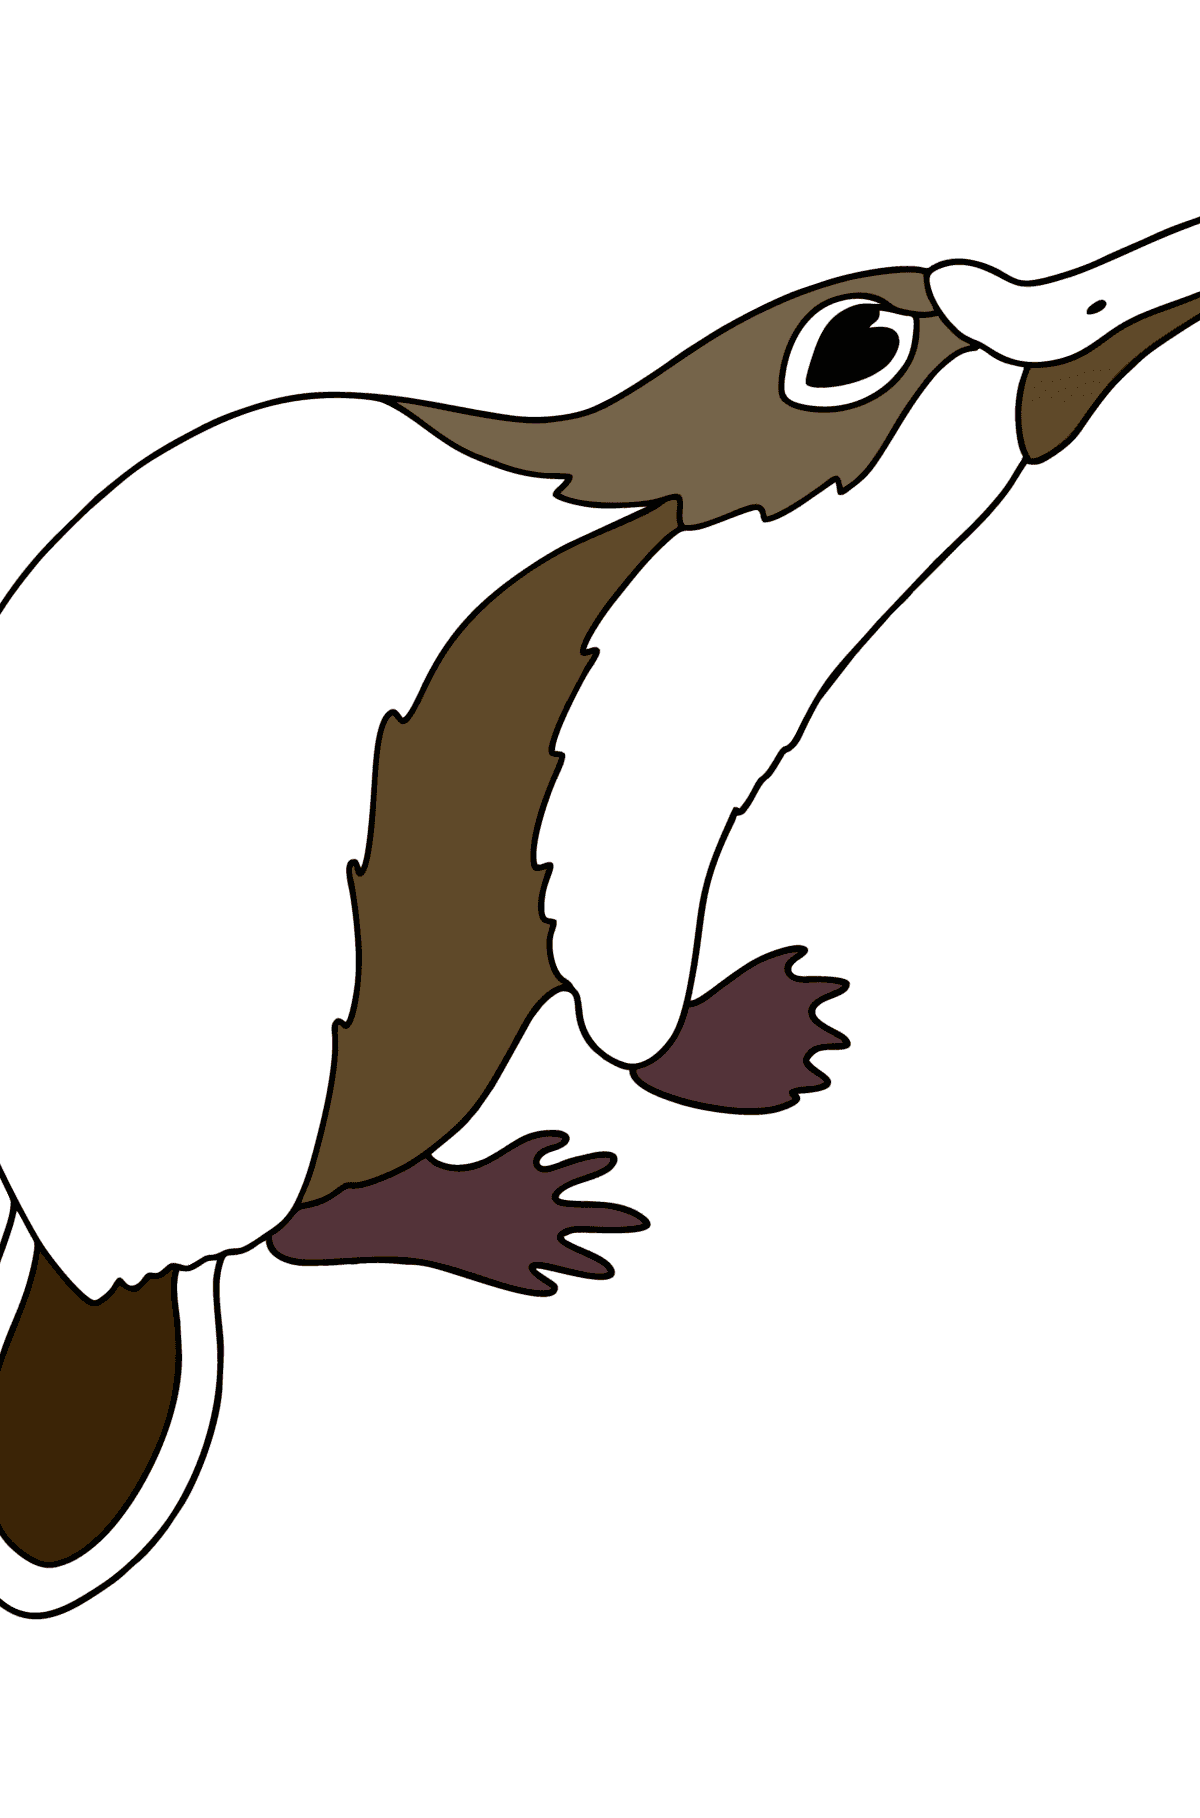 Platypus Australia сoloring page - Coloring Pages for Kids